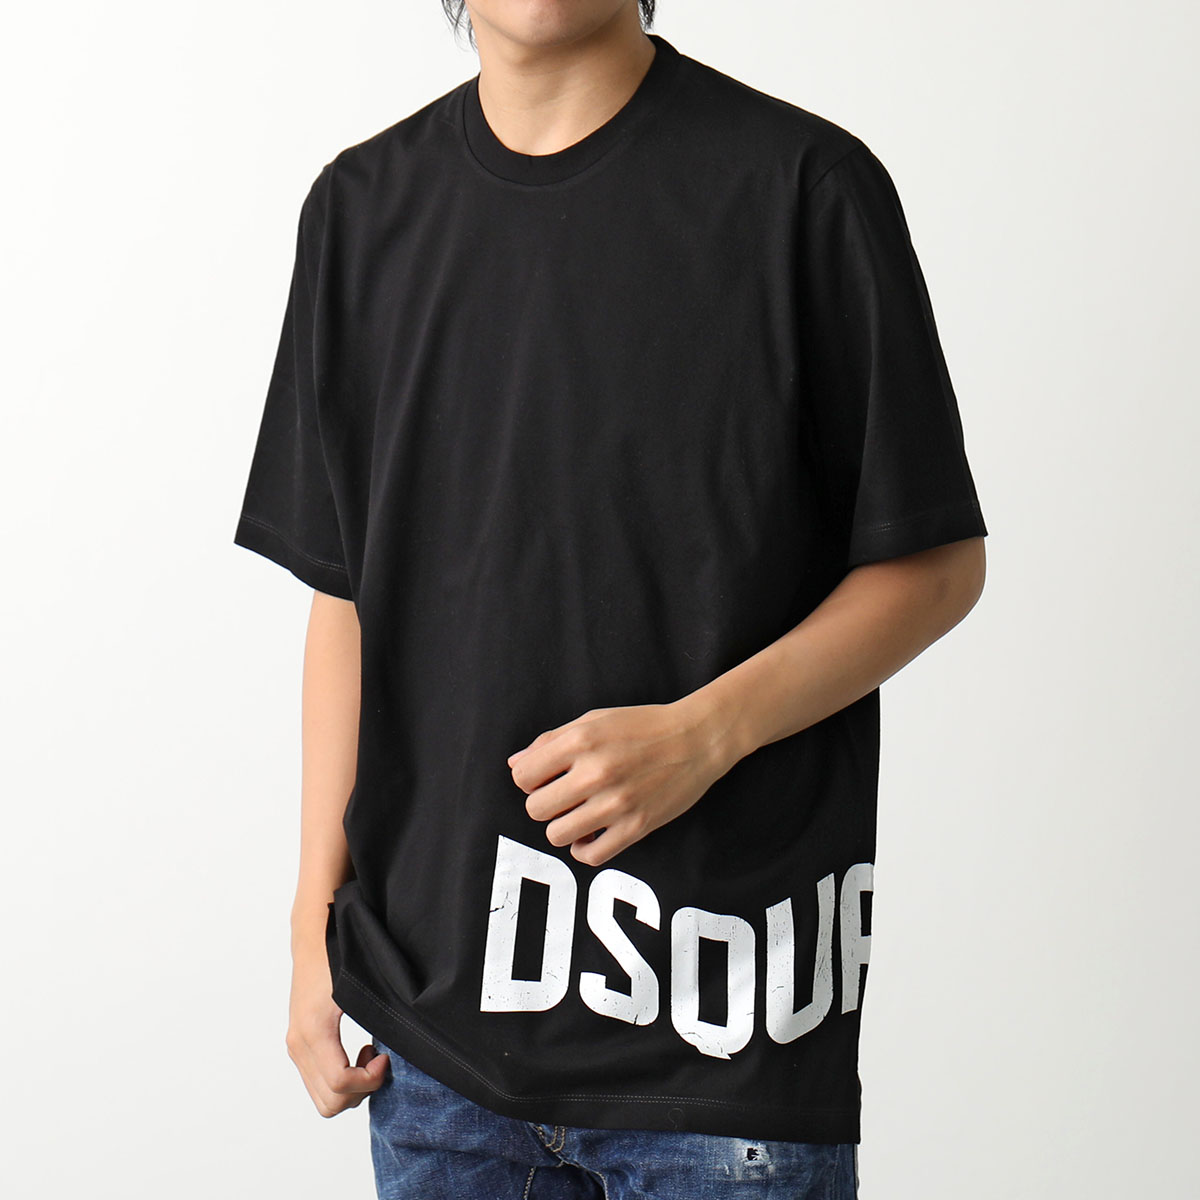 DSQUARED2 Tシャツ SLOUCH T-SHIRT S74GD1090 S23009 メンズ...